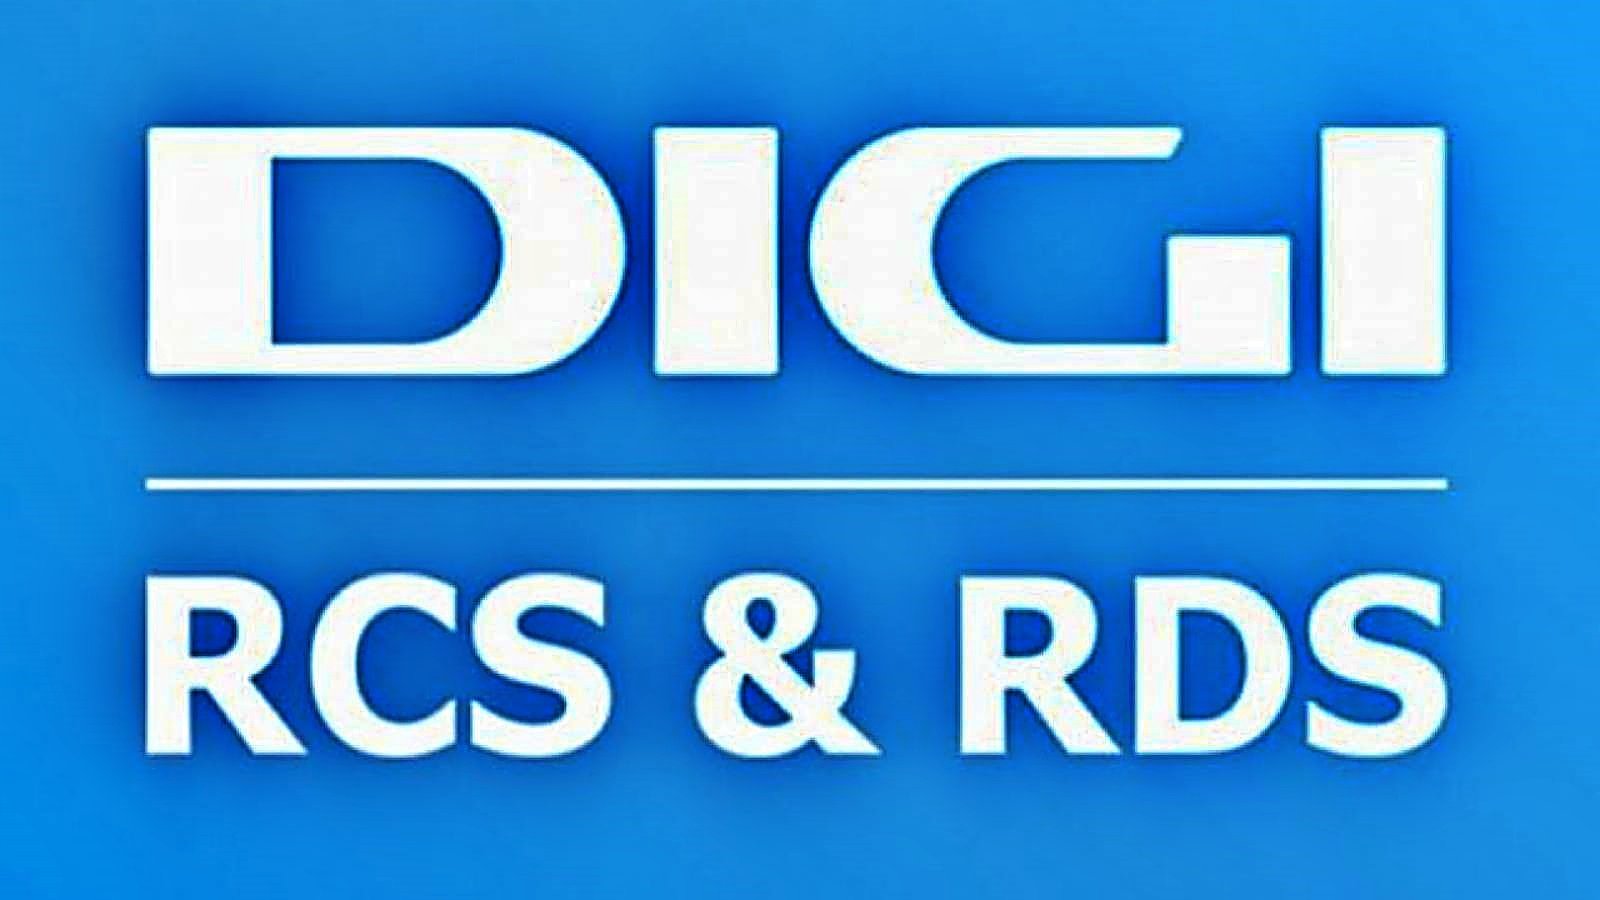 DIGI RCS & RDS: OFFICIAL Announcement, Major Change at the Beginning of 2022 thumbnail